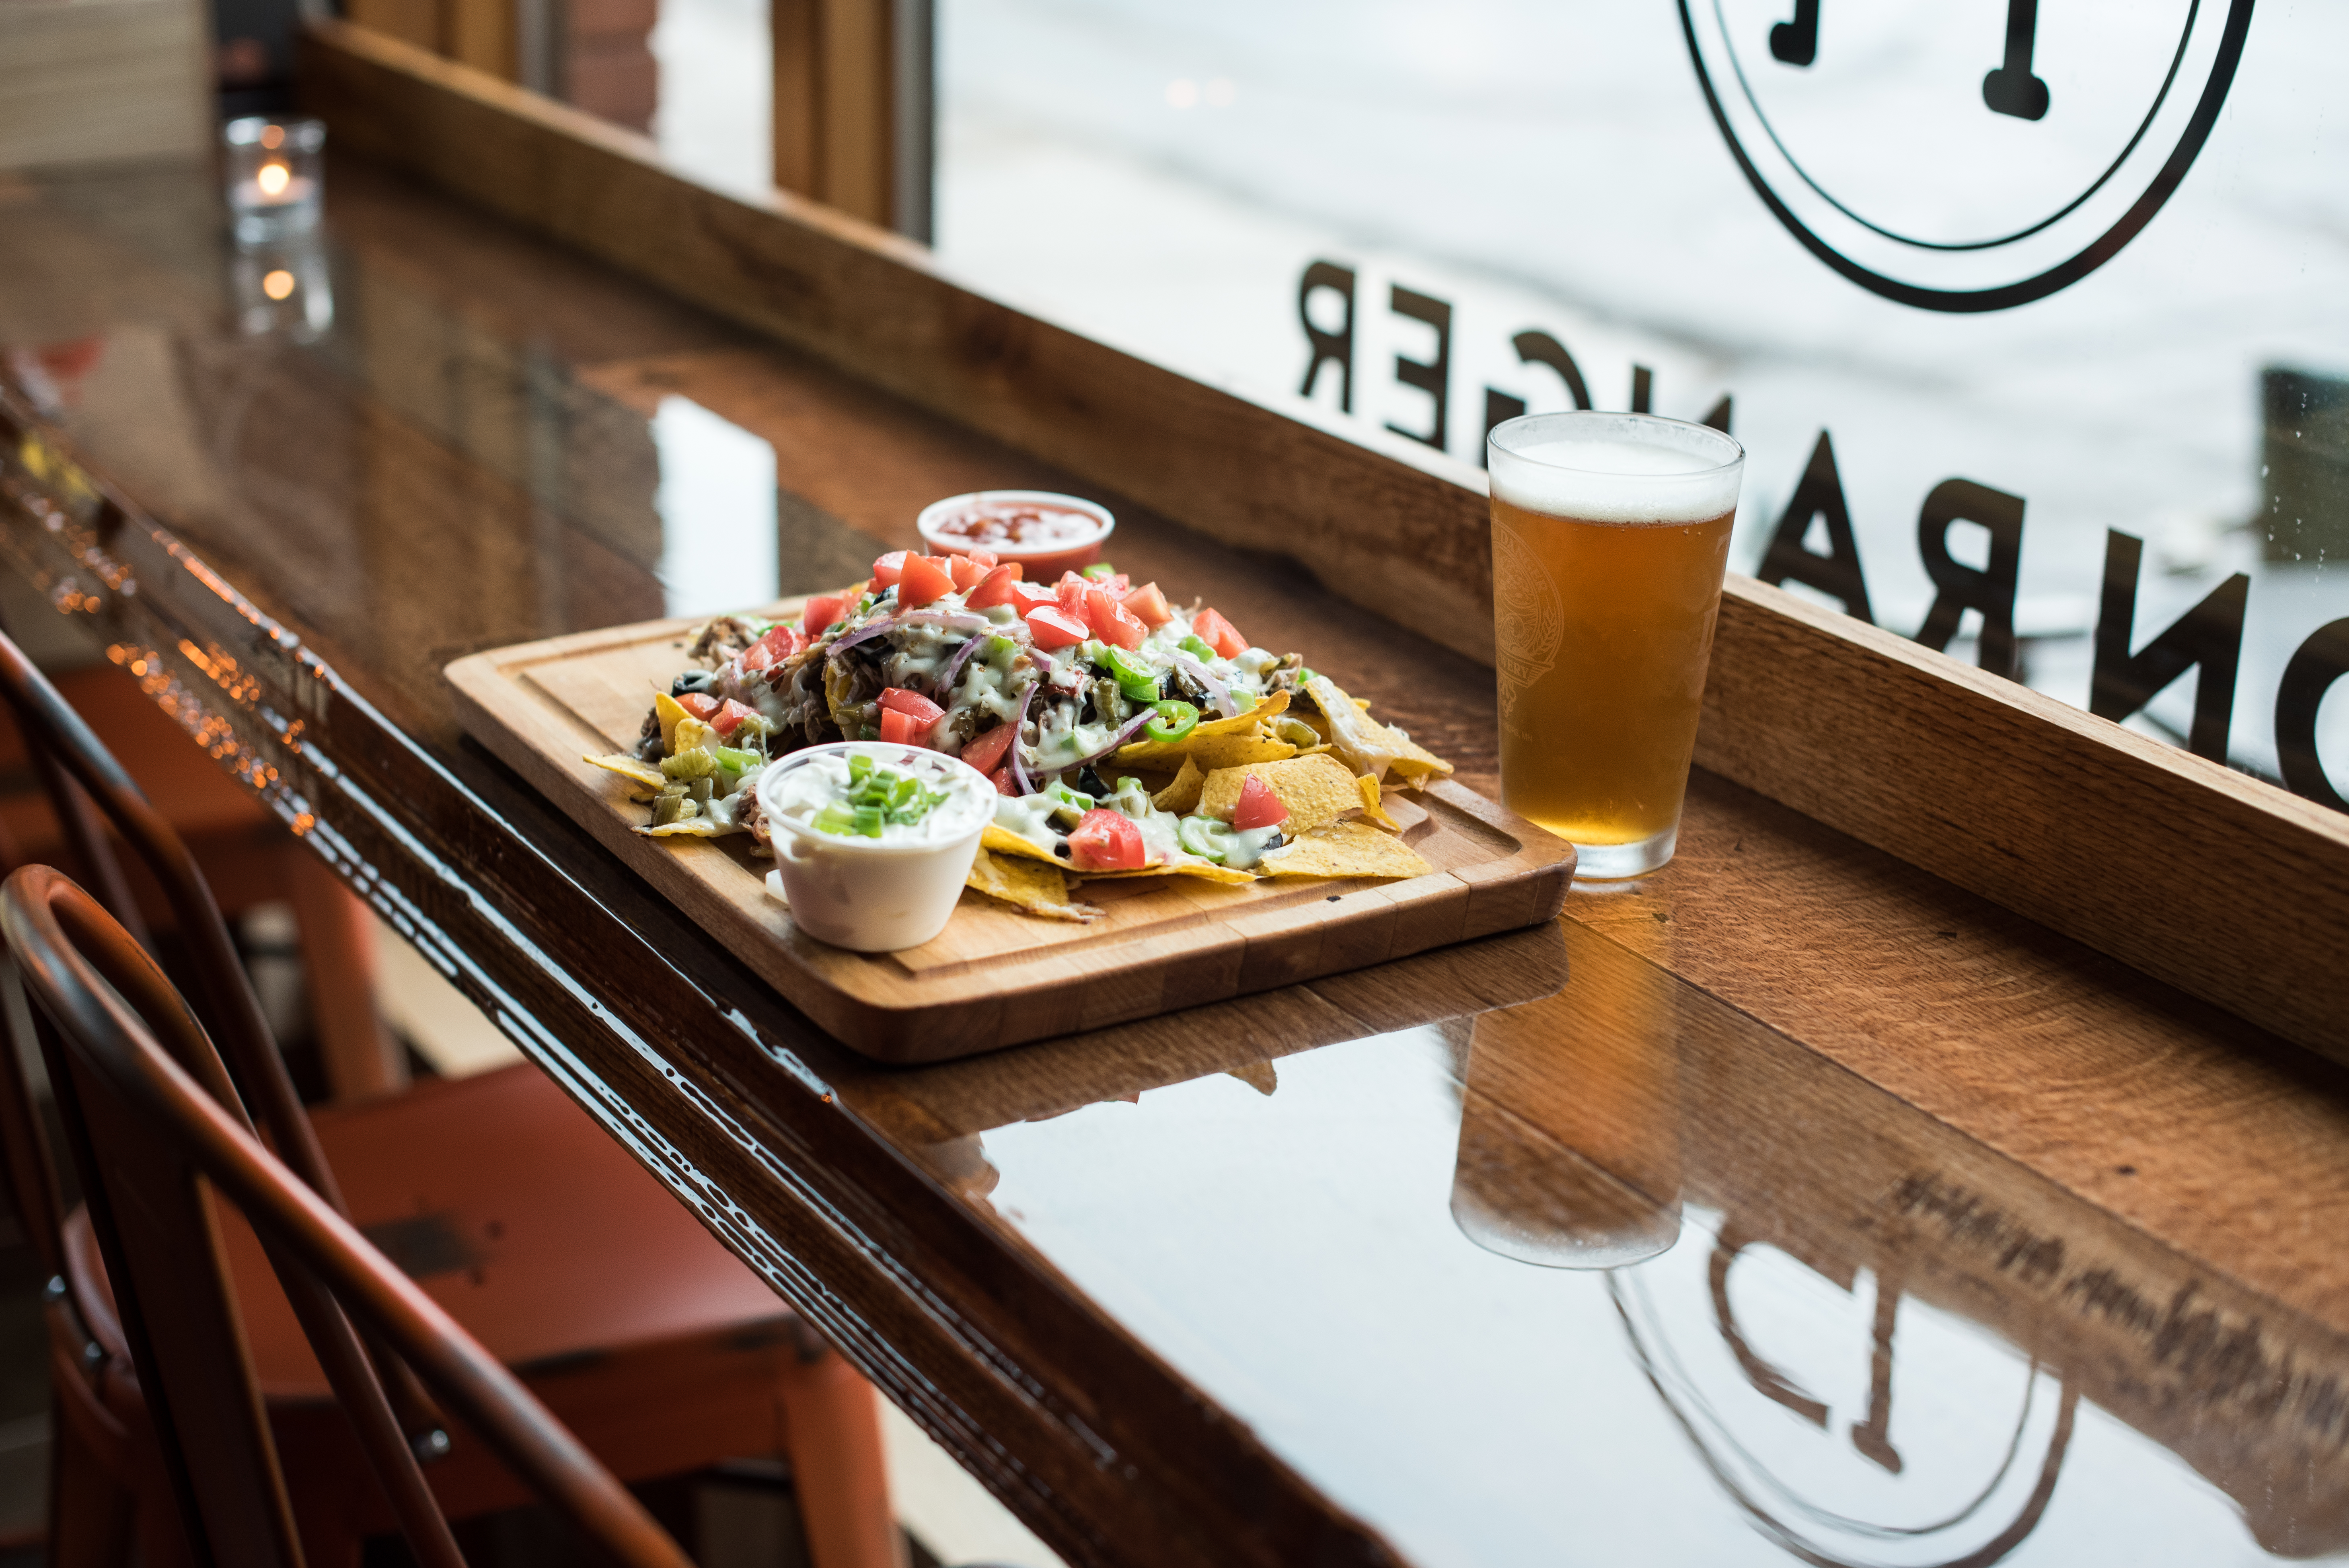 Facing the Iron Ranger’s front window is a cutting board loaded with nachos next to a pint of beer